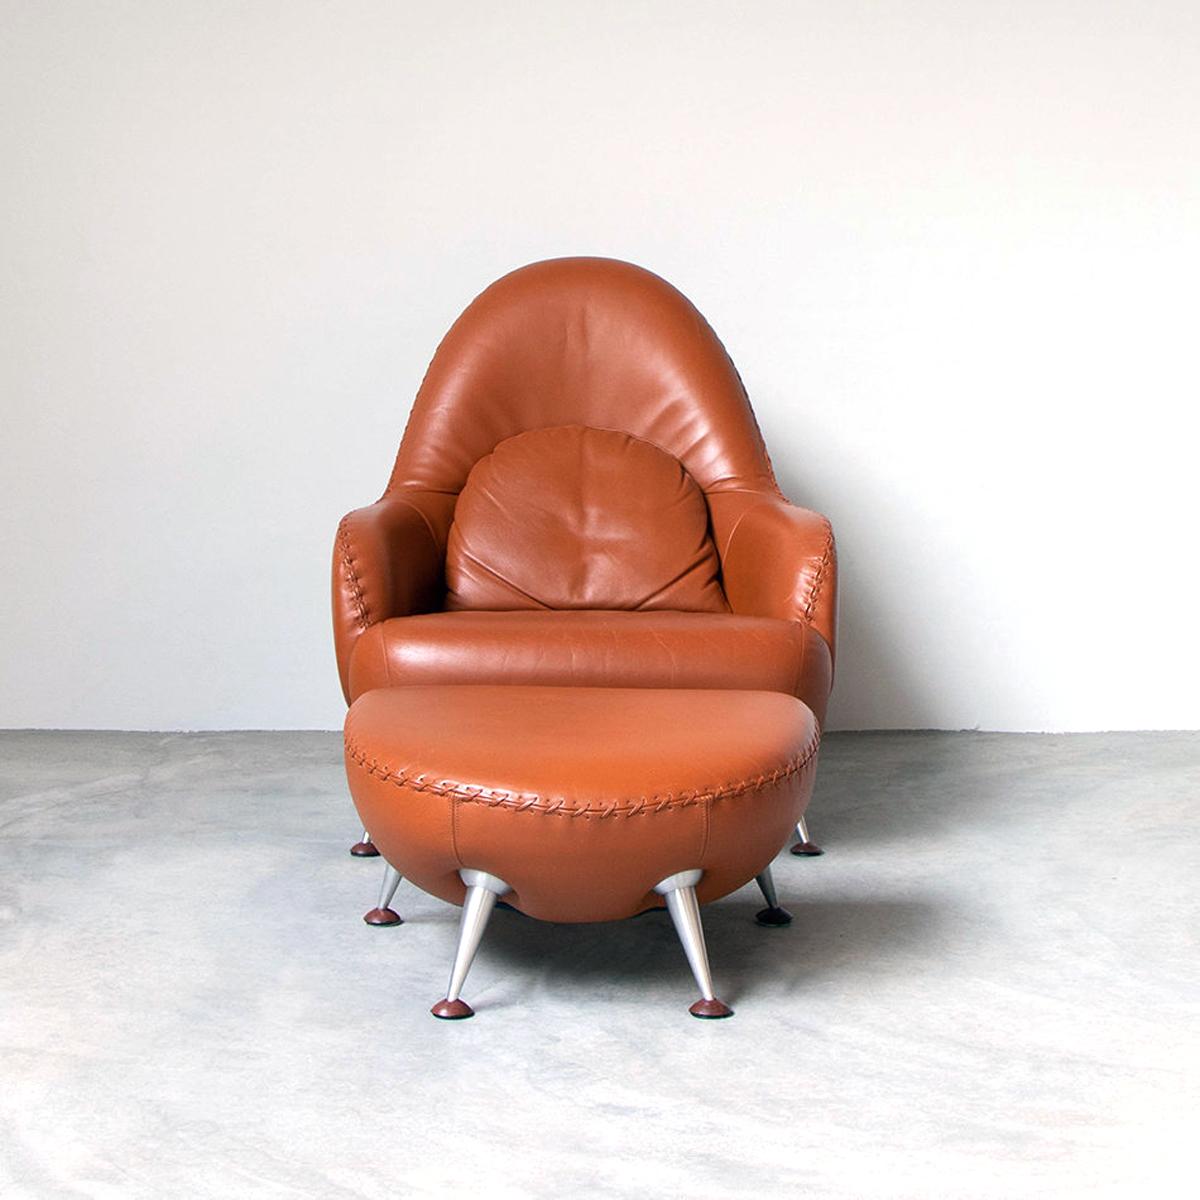 Comfortable lounge armchair by De Sede (DS-102) with thick nappa cognac leather upholstery by Mathias Hoffmann. 
All in very good / excellent original condition.